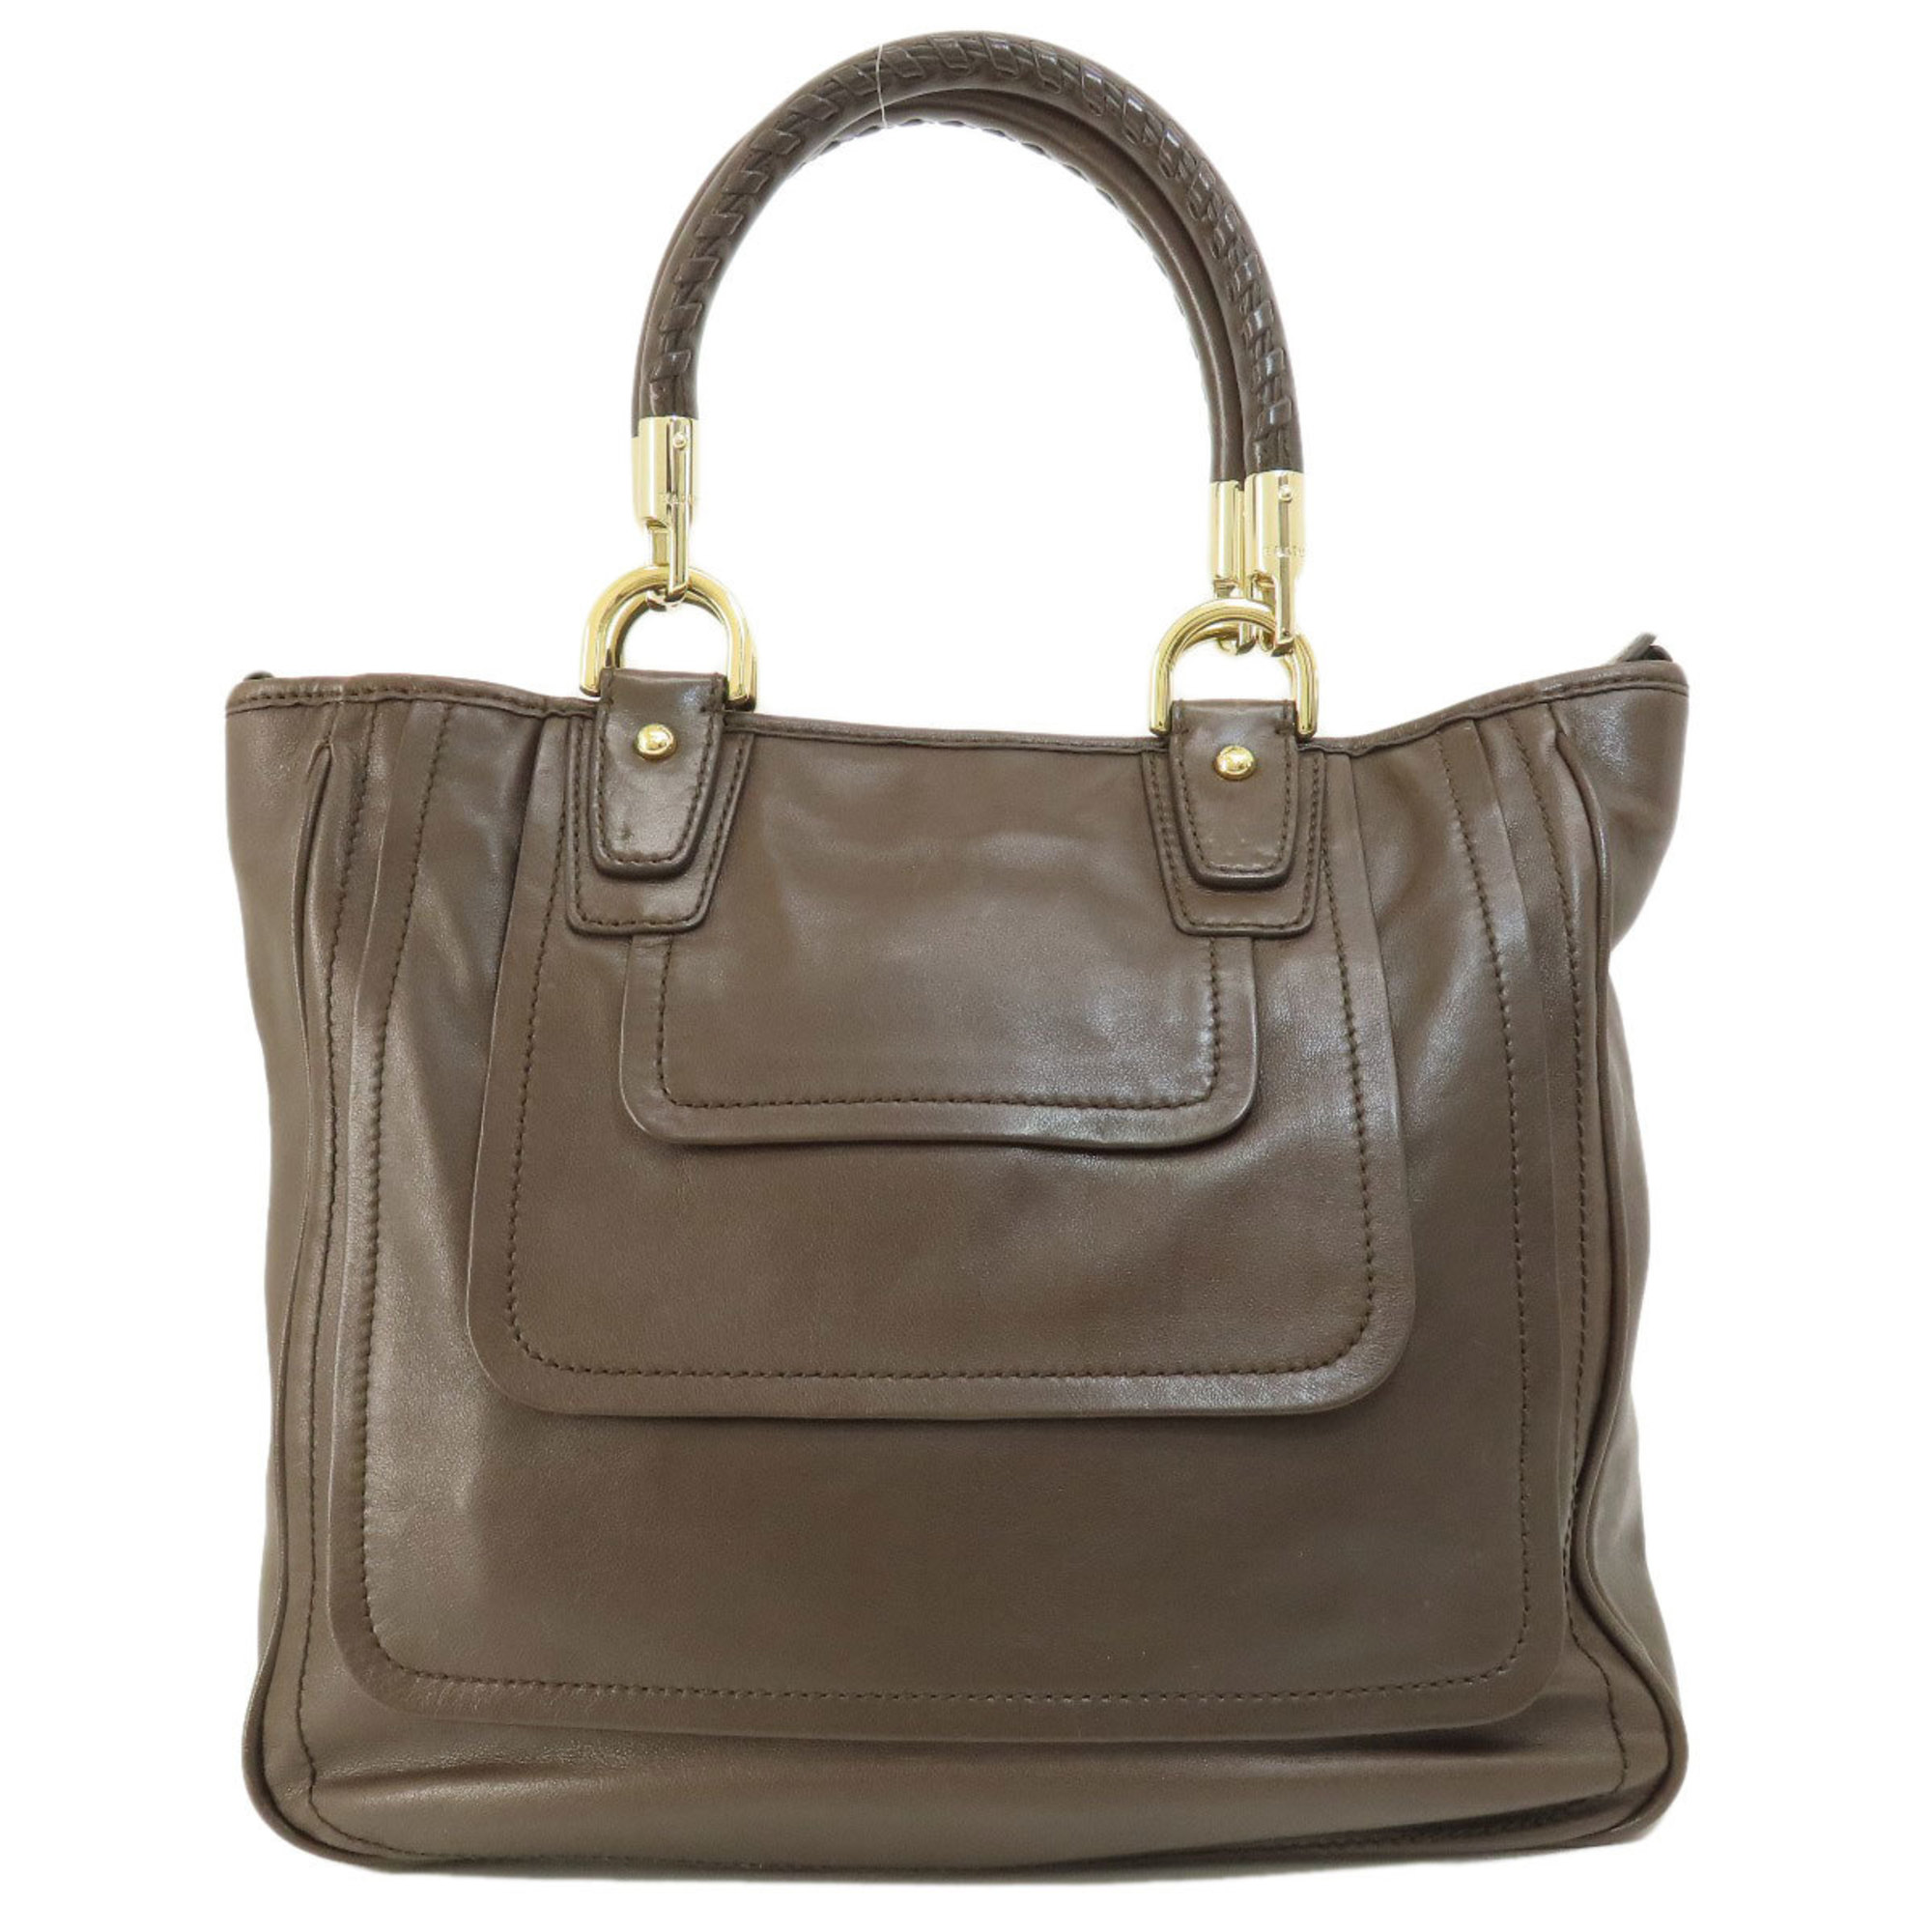 BALLY Tote Bag Leather Women's